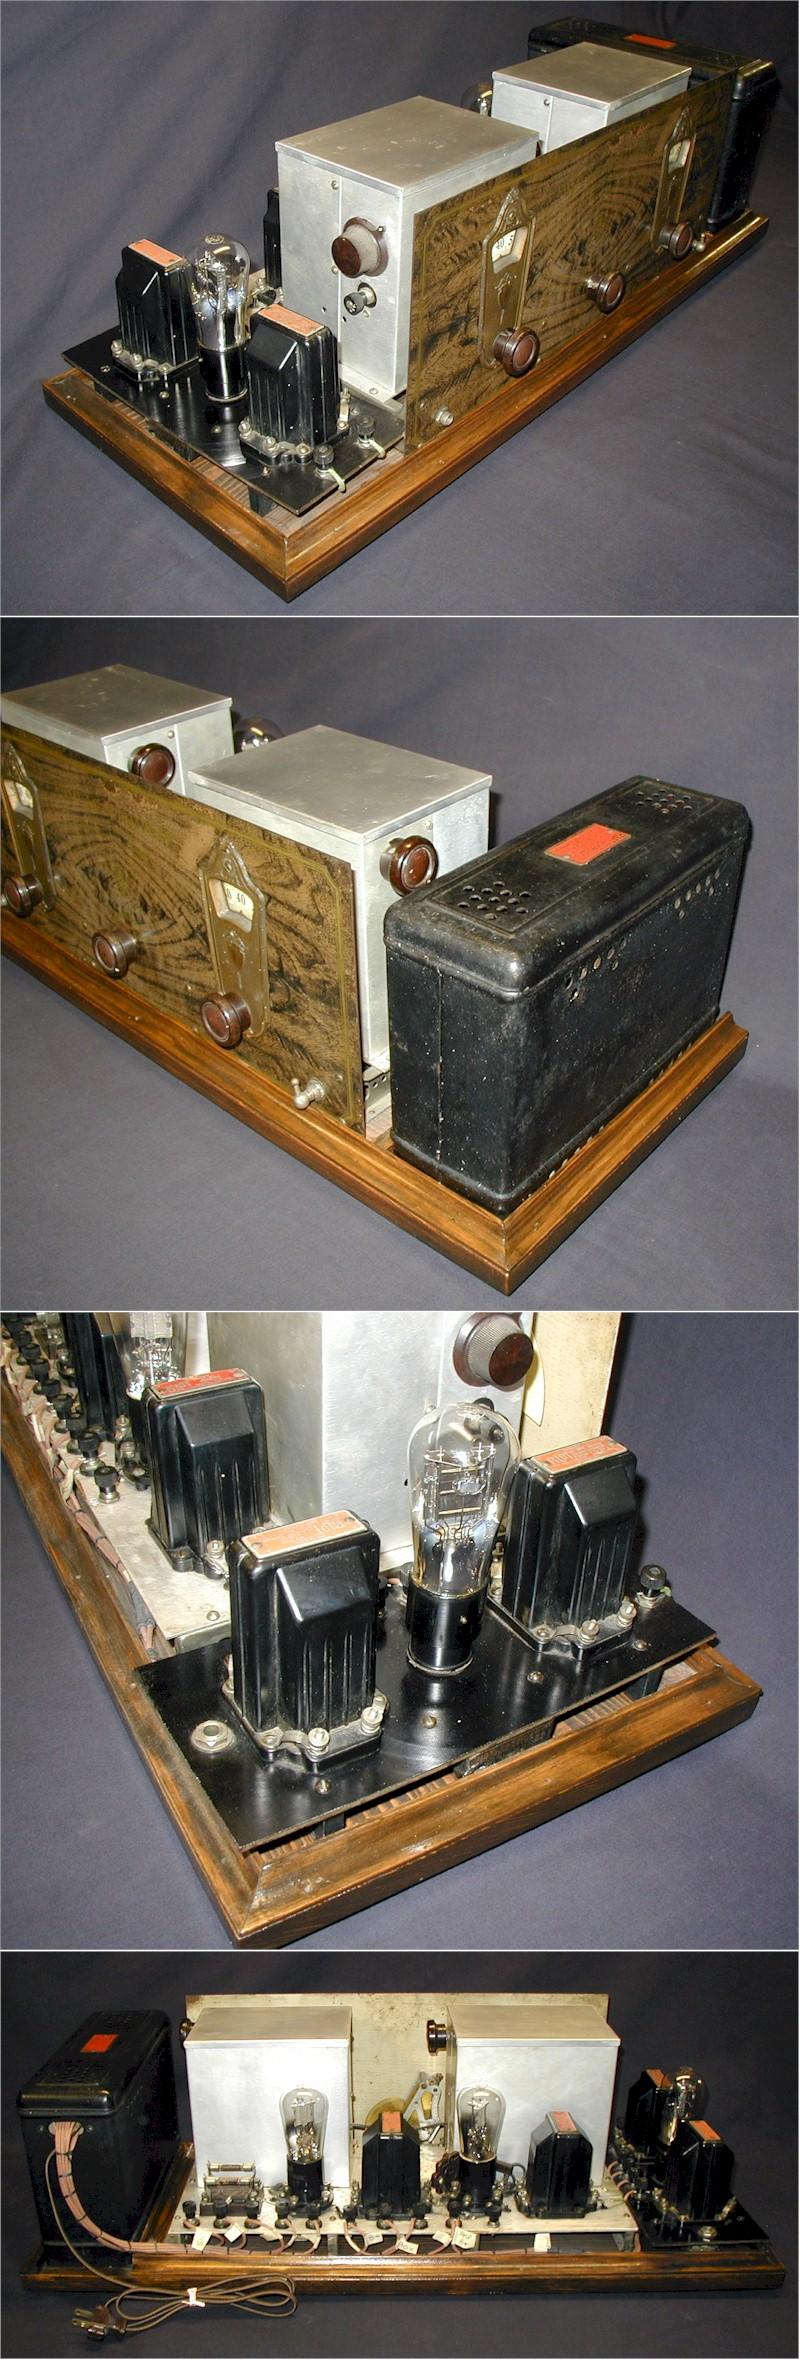 Pilot AC Super-Wasp K-115 with Amplifier & Power Supply (1928)